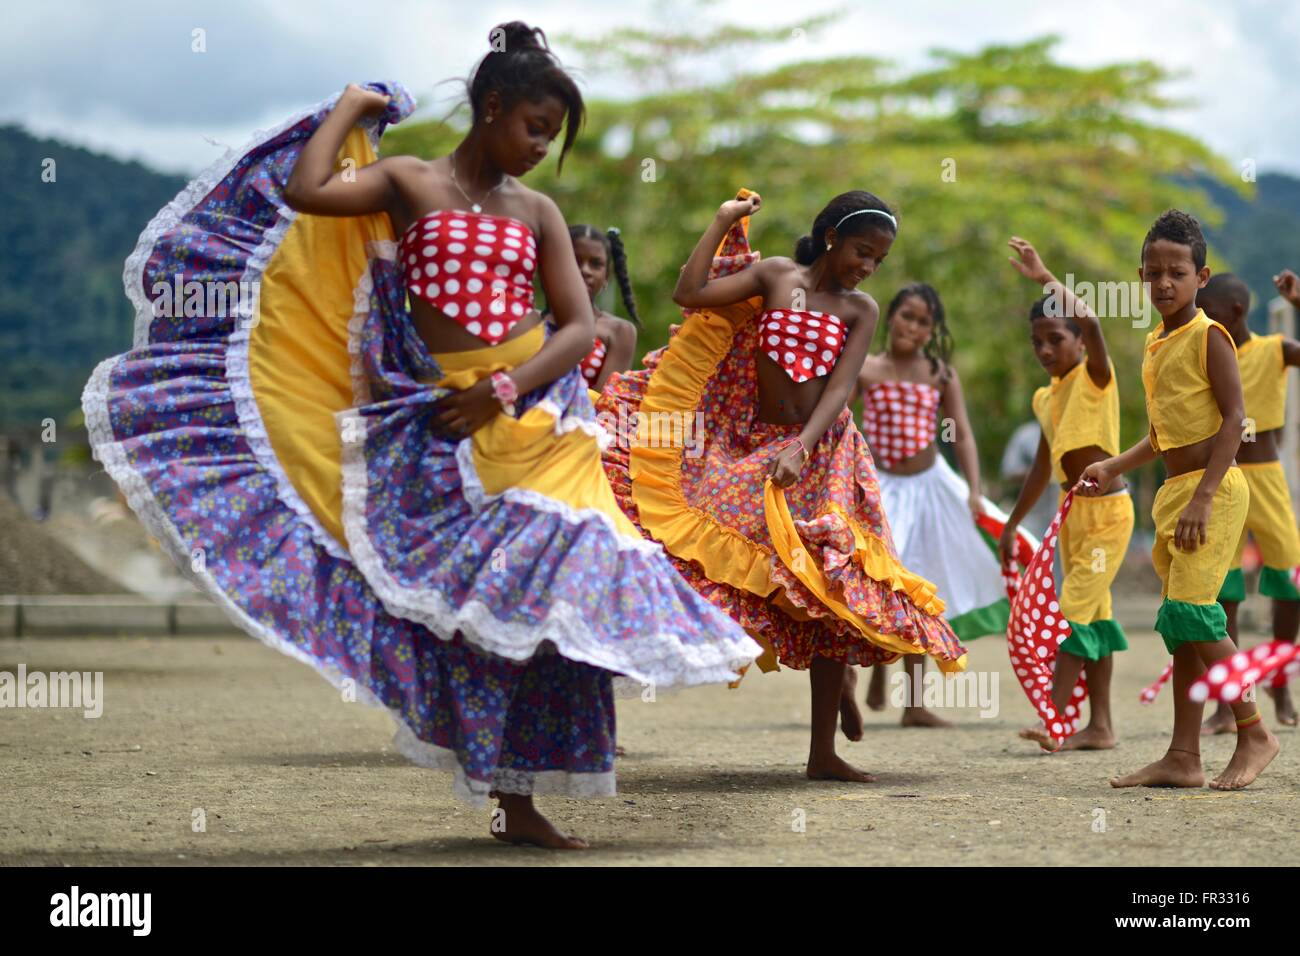 Afro-Colombian dances with colorful traditional clothing. Stock Photo